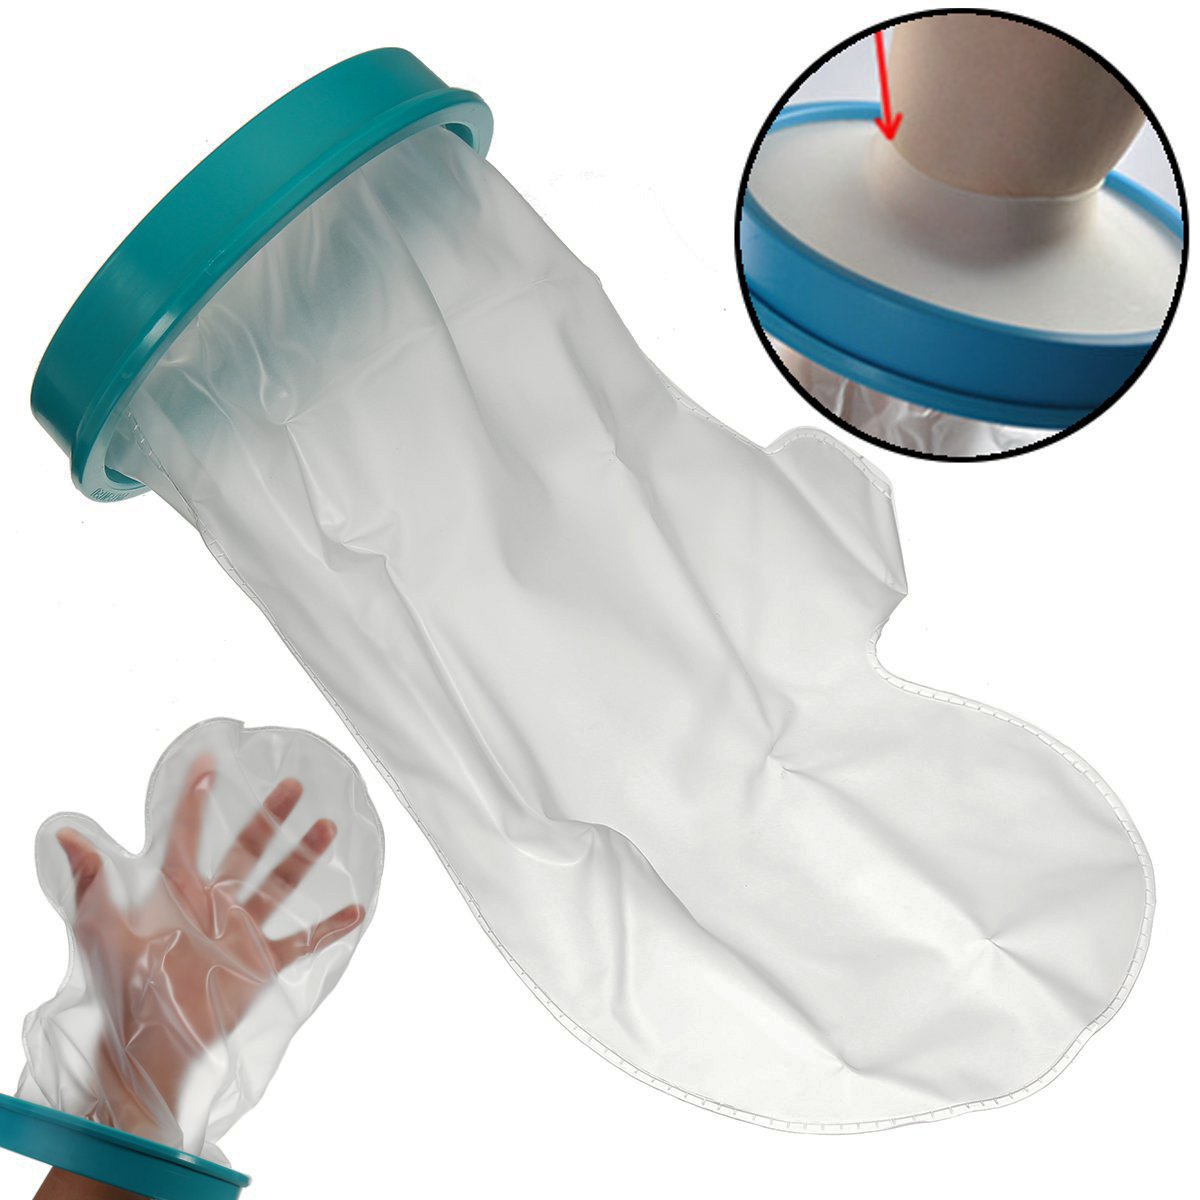 Seal-Adult-Cast-Bandage-Protector-Cover-Waterproof-Case-Hand-Medical-Bath-1641260